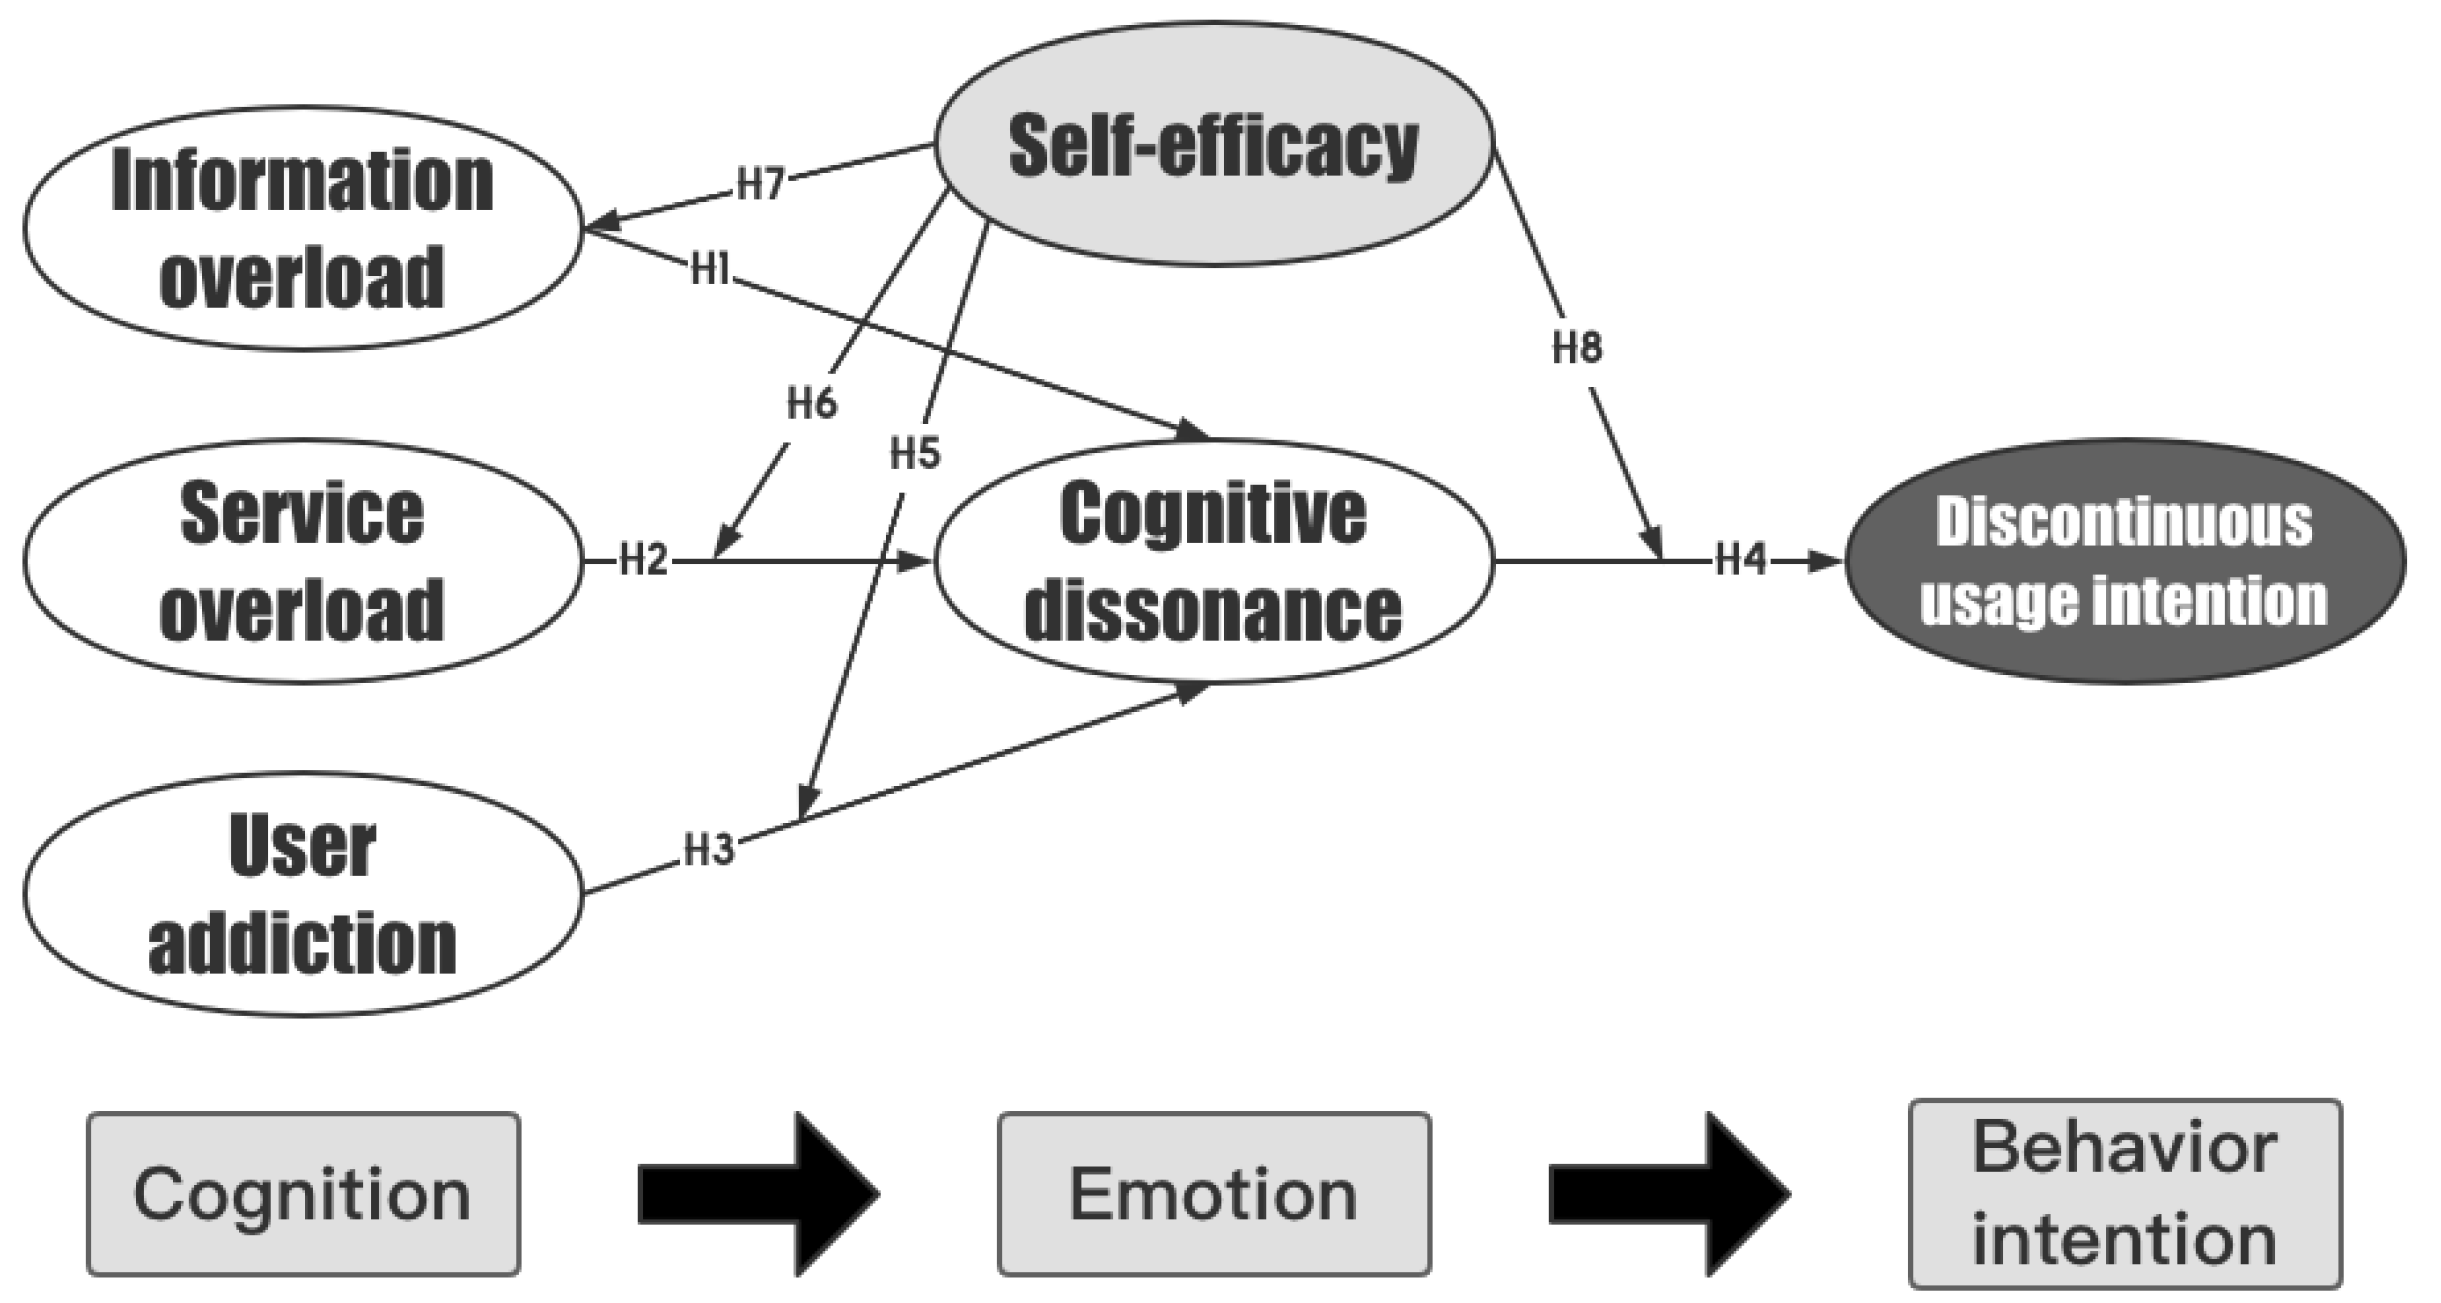 Behavioral Sciences Free Full-Text Mind over Matter Examining the Role of Cognitive Dissonance and Self-Efficacy in Discontinuous Usage Intentions on Pan-Entertainment Mobile Live Broadcast Platforms photo